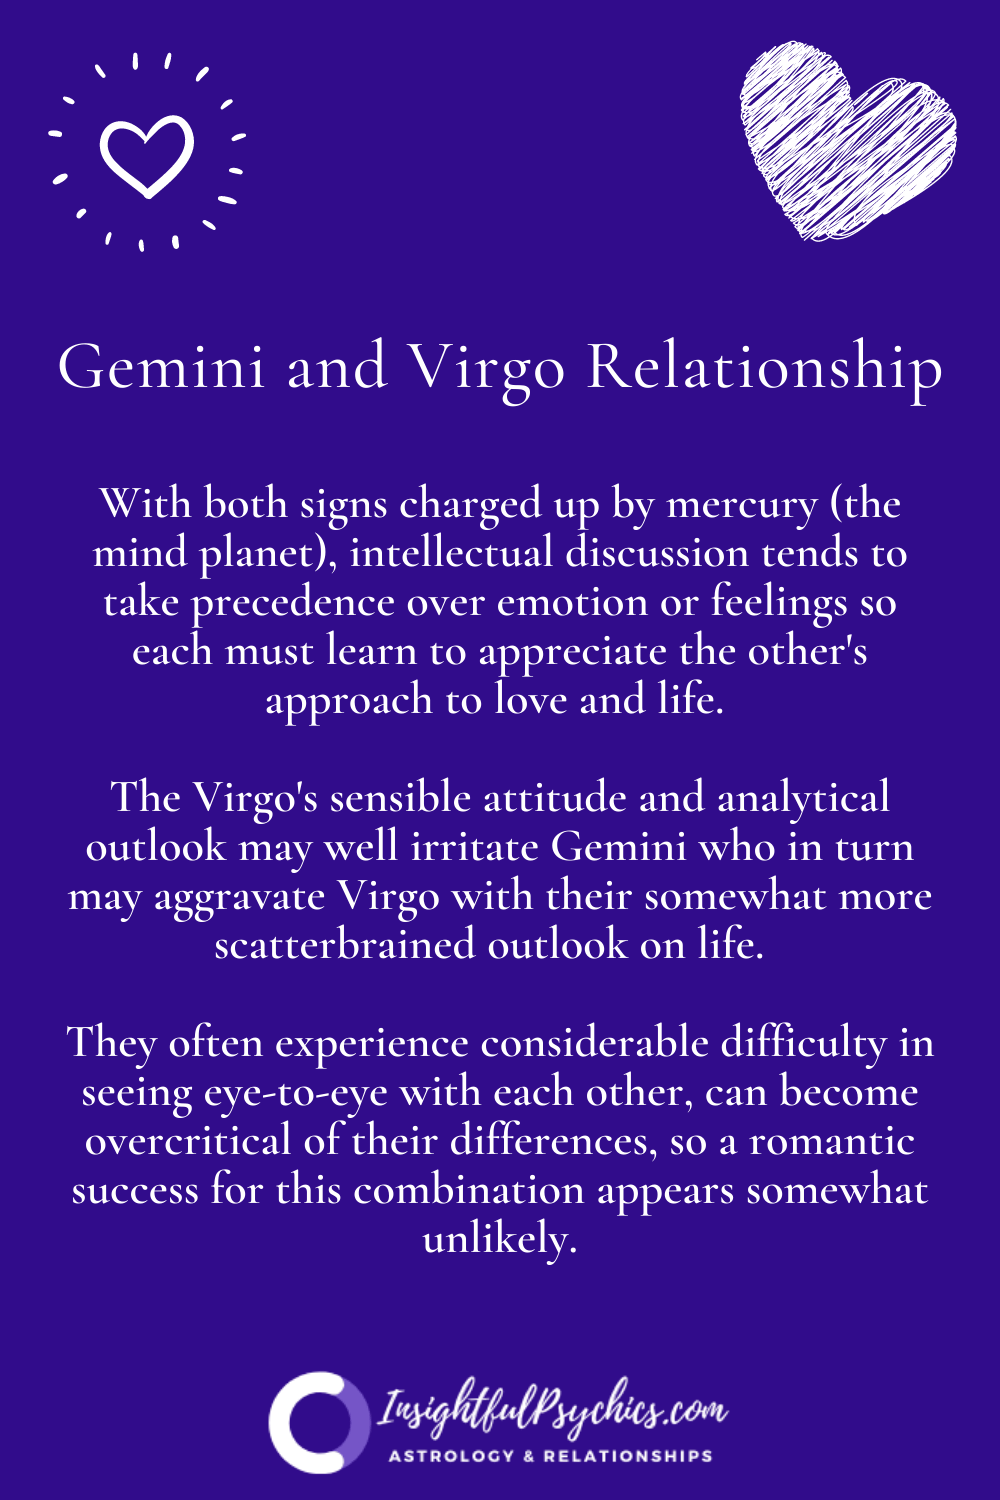 Gemini and Virgo Compatibility: Sex, Love, and Friendship